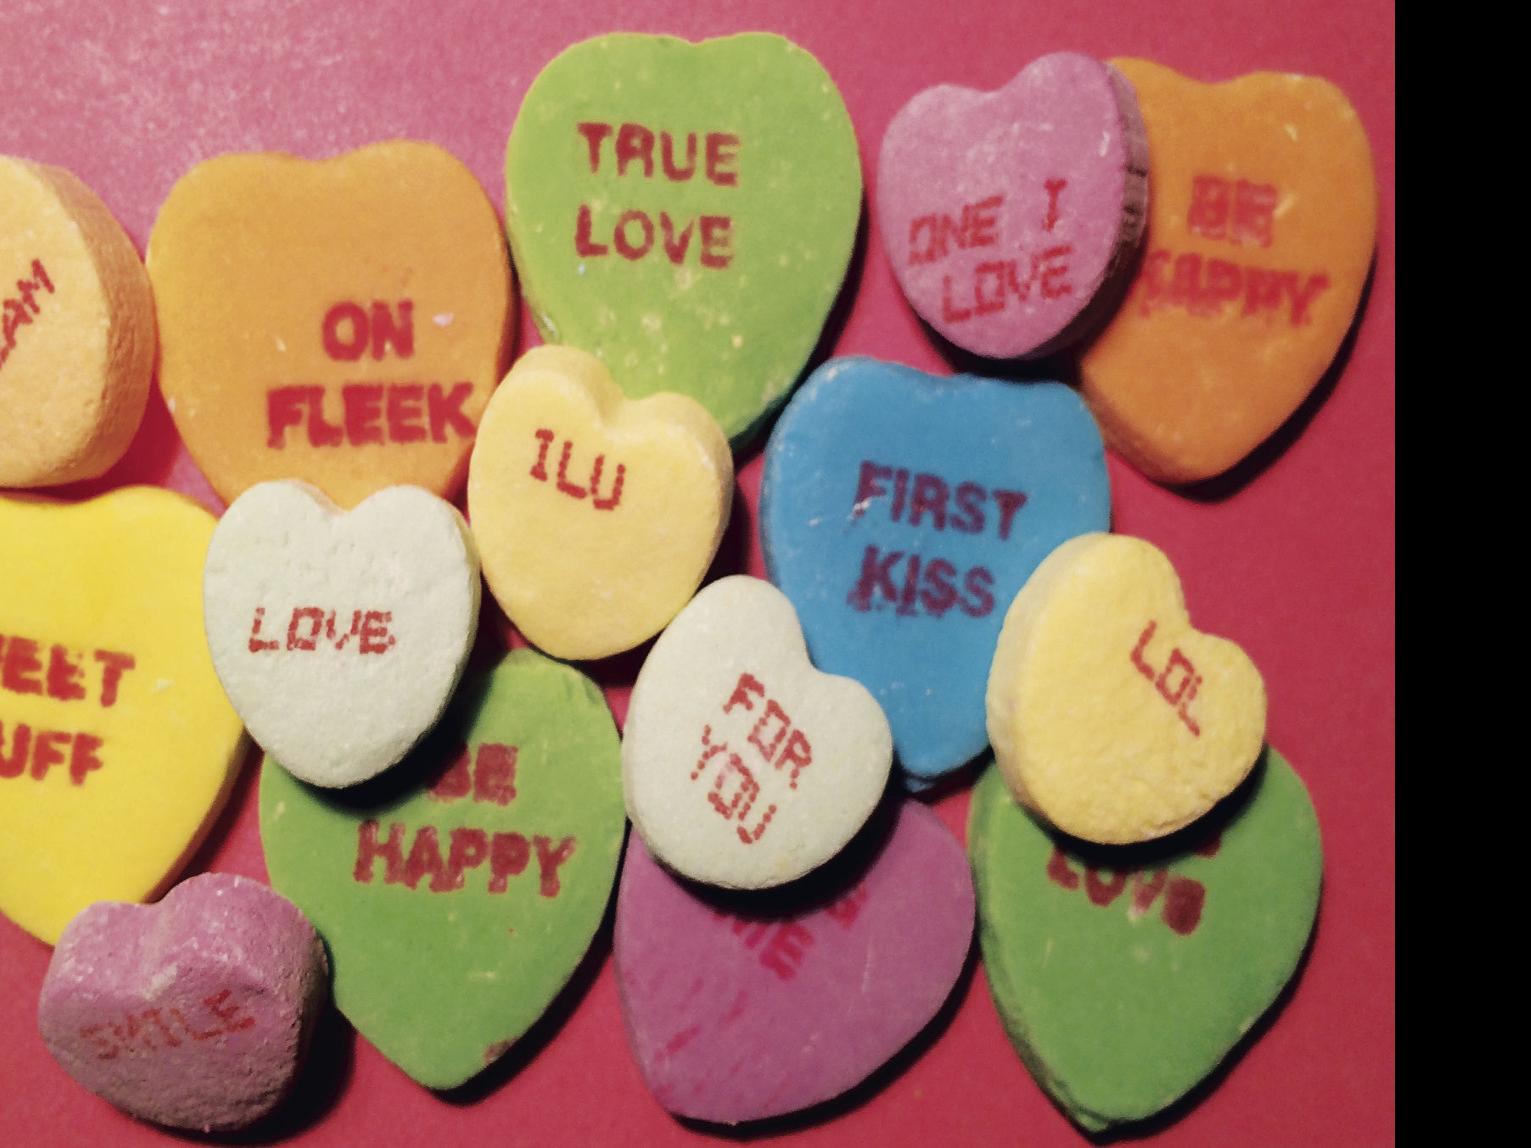 9 things you didn't know about Valentine's Day candy hearts